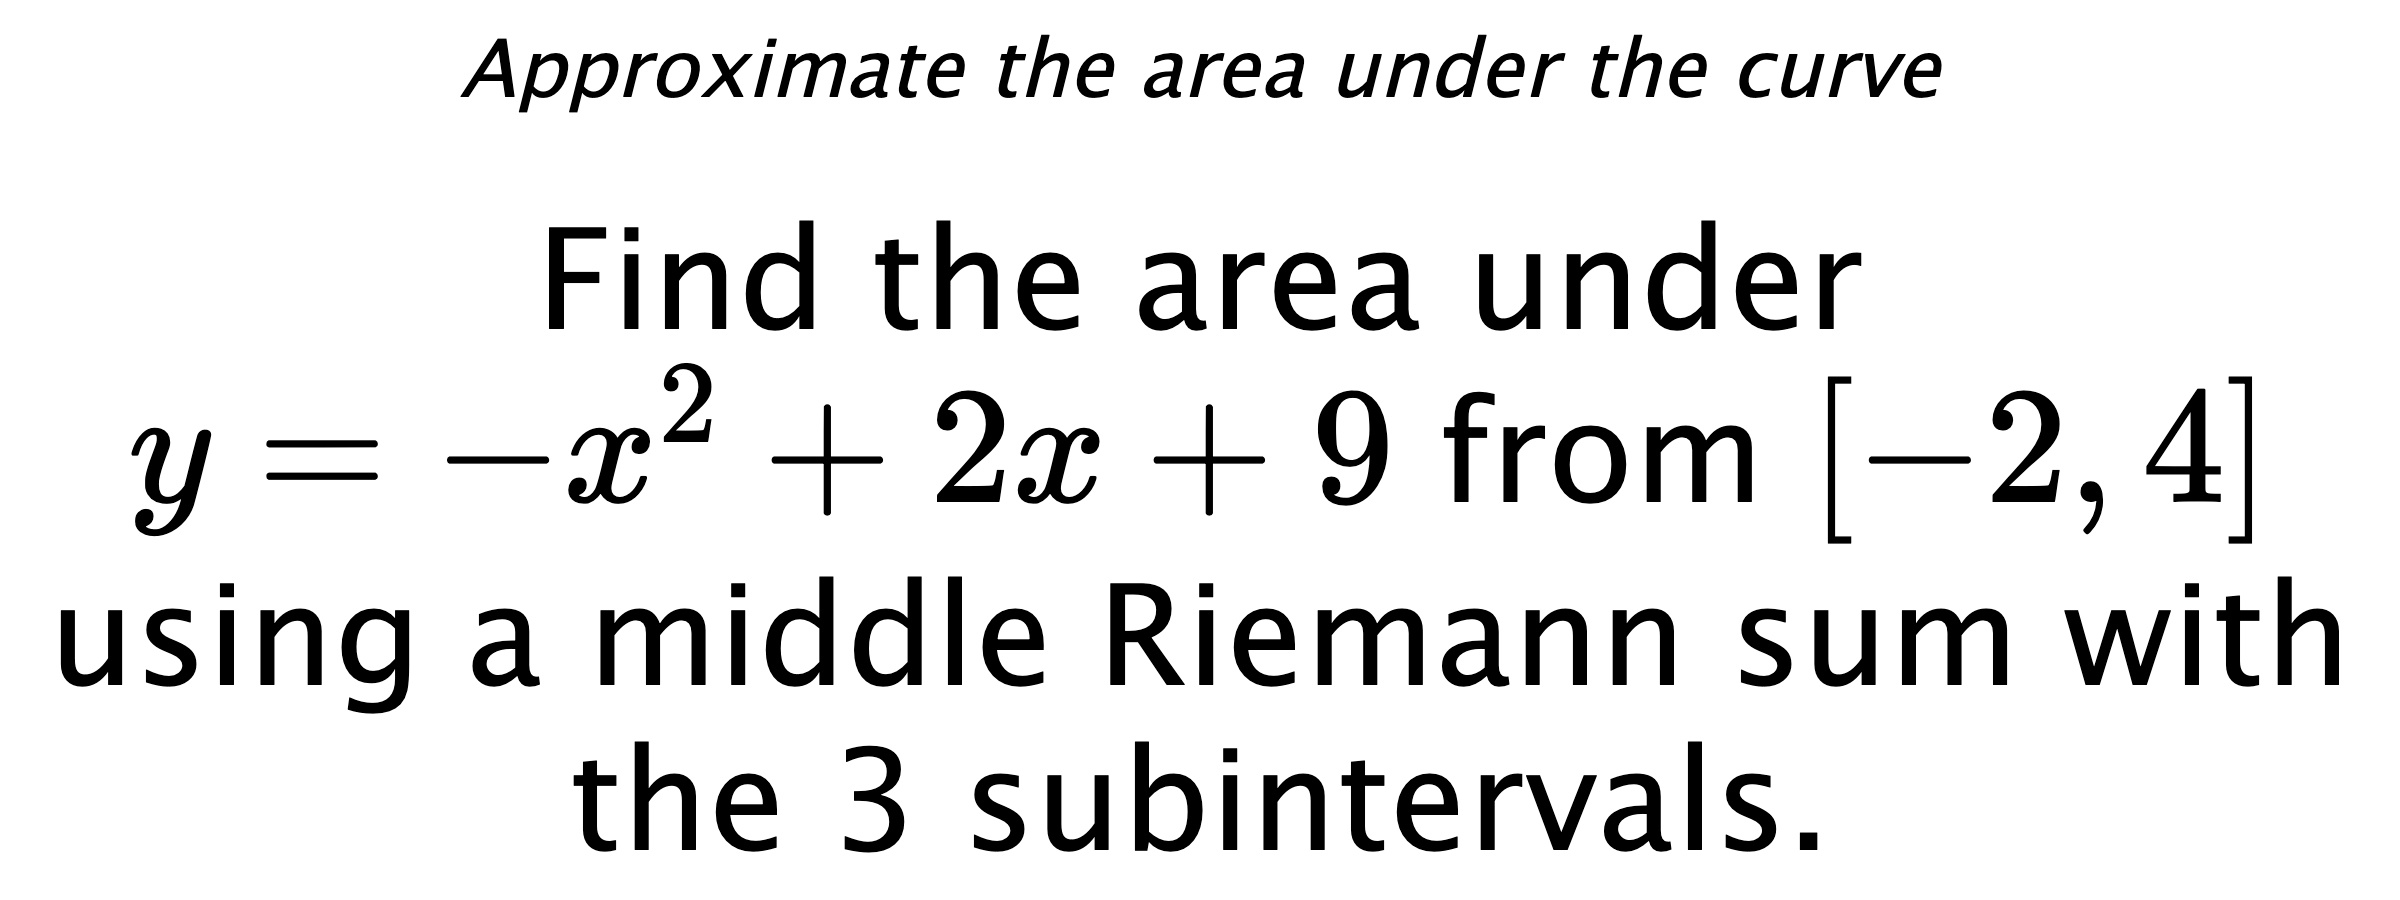 Approximate the area under the curve Find the area under $ y=-x^2+2x+9 $ from $ [-2,4] $ using a middle Riemann sum with the 3 subintervals.